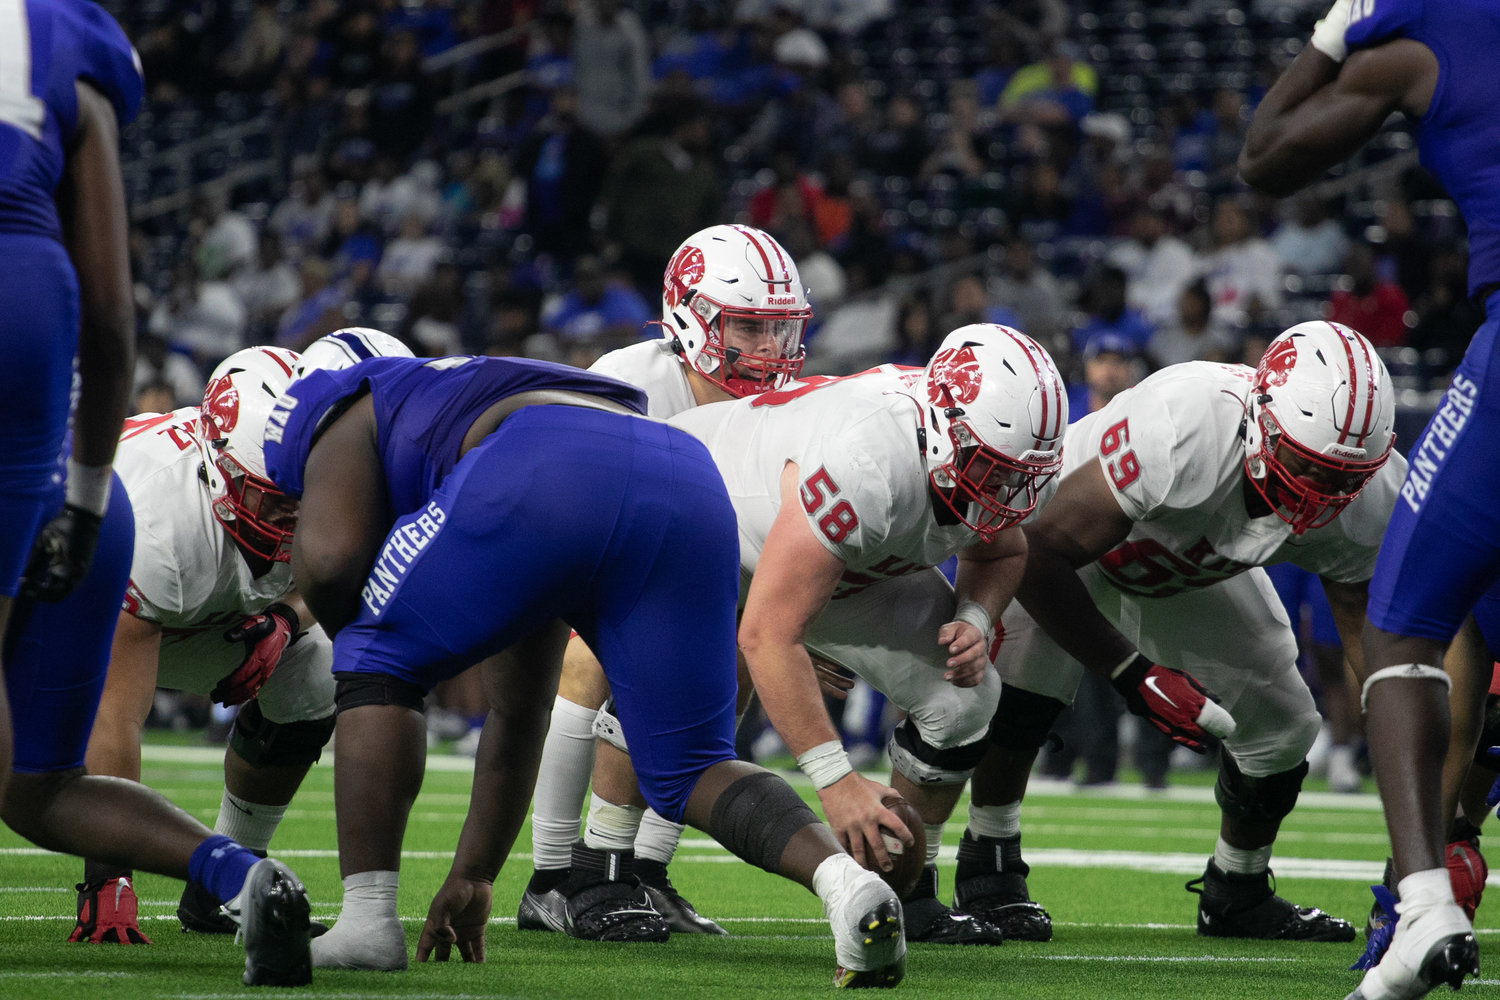 Caleb Koger sits under center during Friday's Class 6A-Divison II Region III Final between Katy and C.E. King at NRG Stadium.